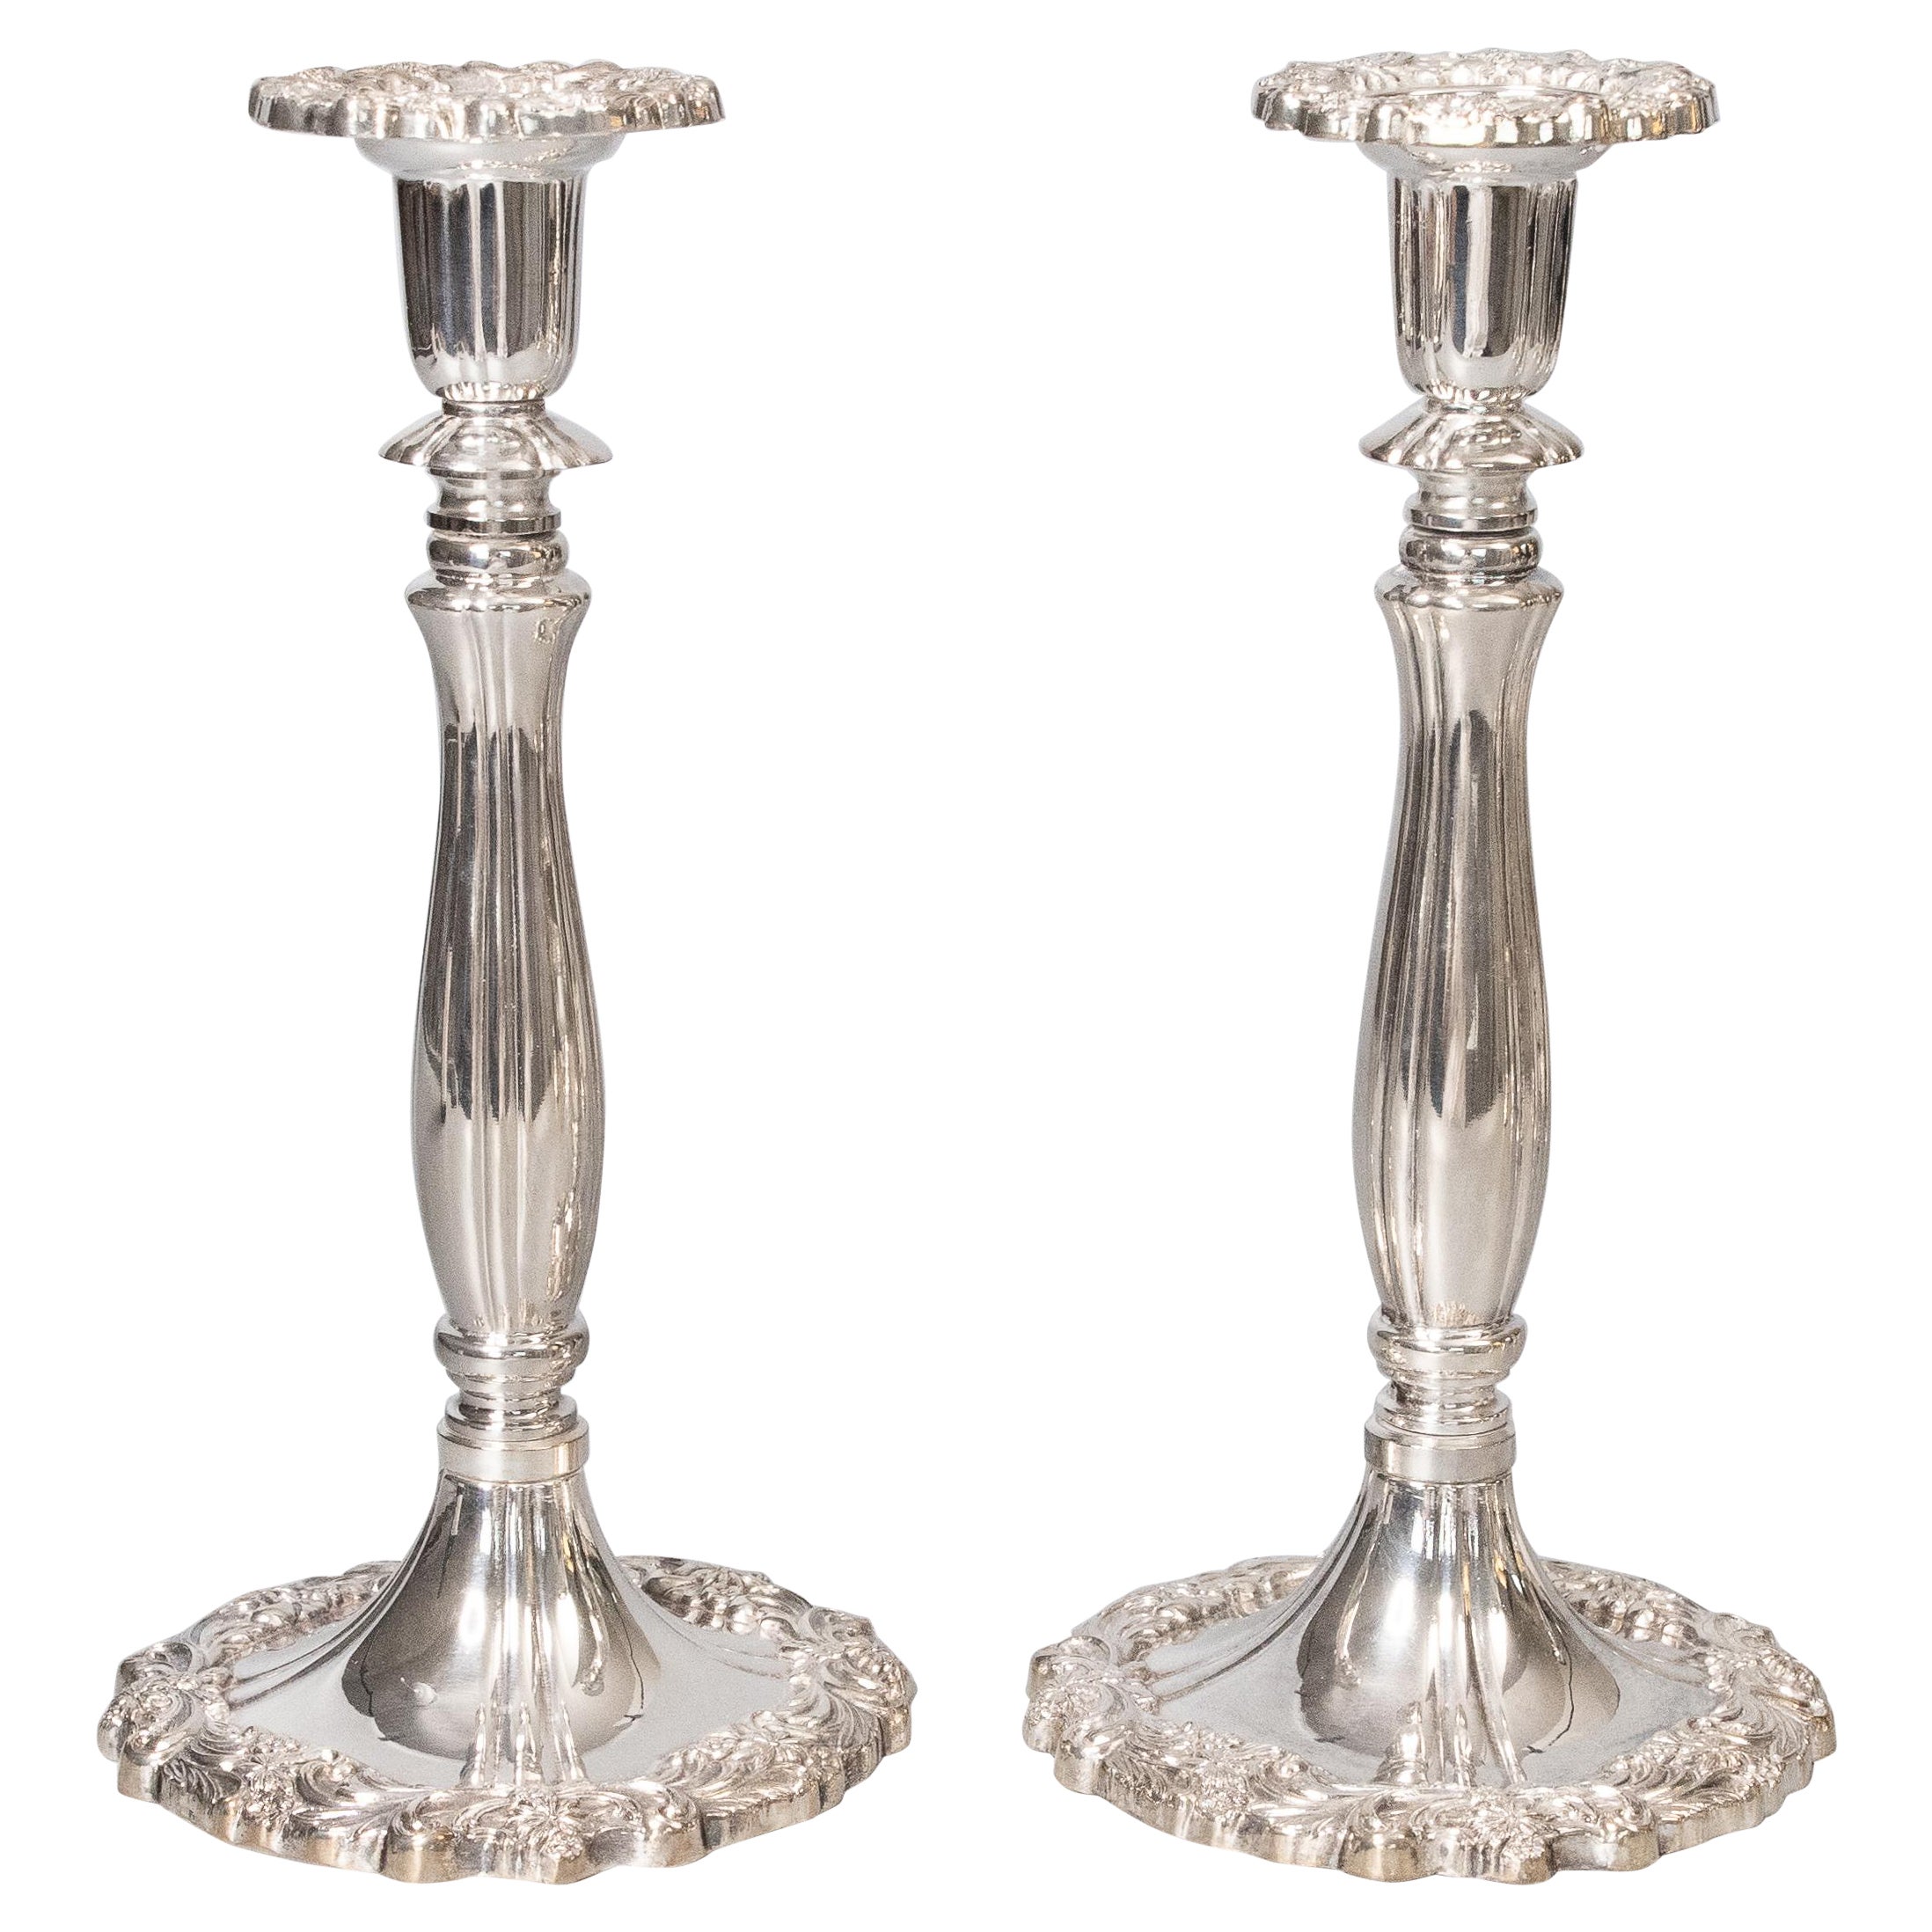 Pair of Mid-20th Century Italian Rococo Style Silver Plate Candlesticks